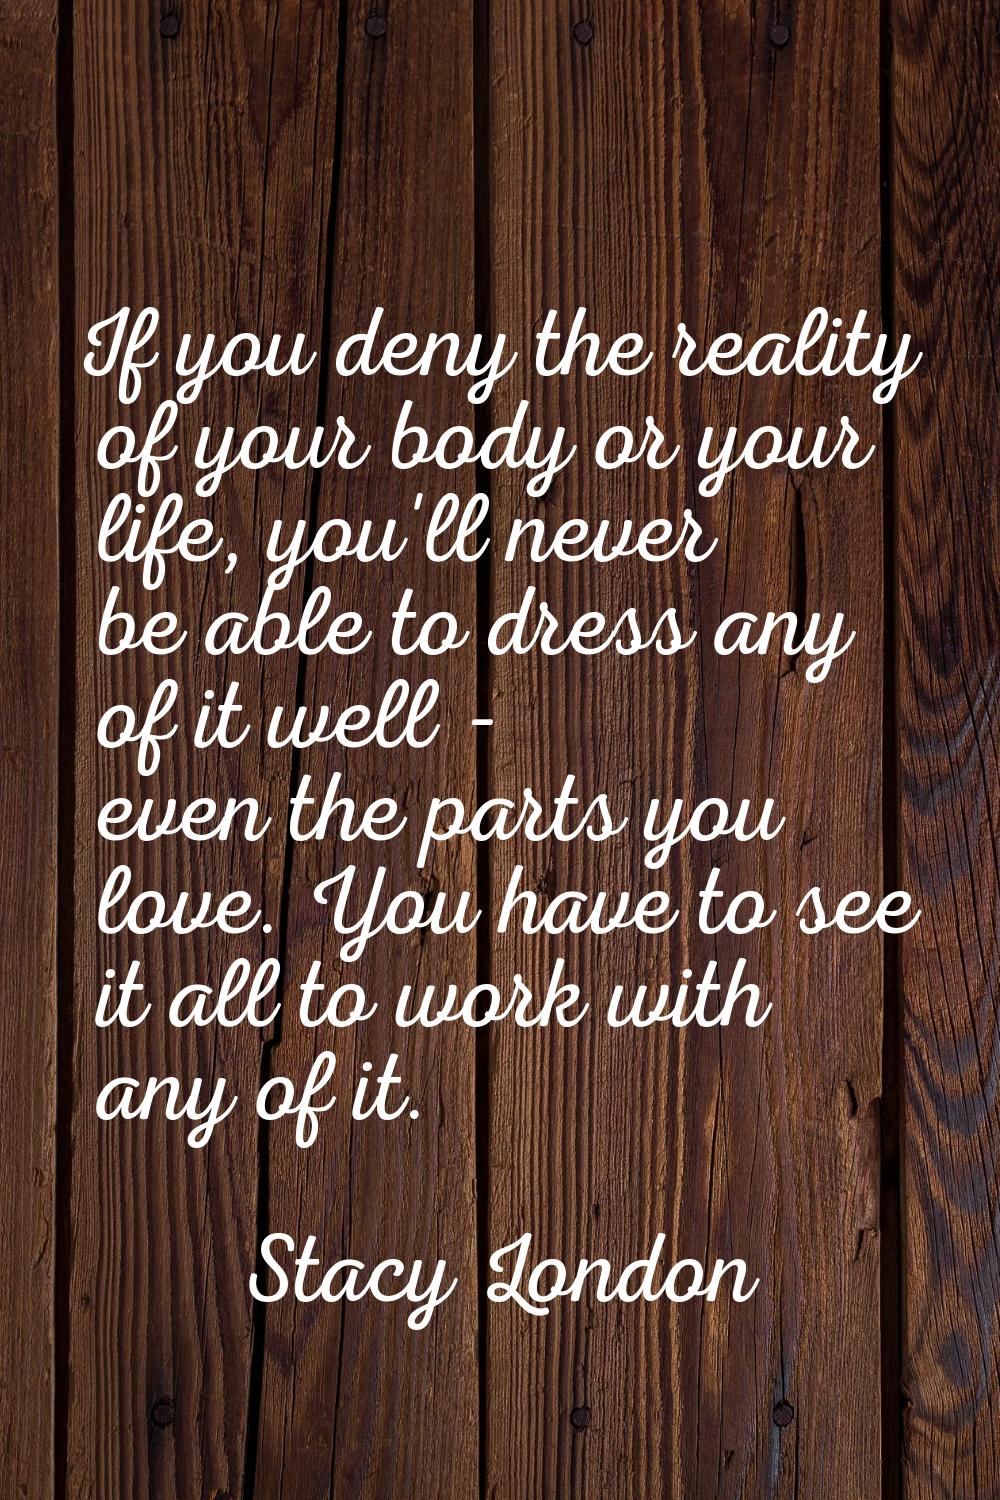 If you deny the reality of your body or your life, you'll never be able to dress any of it well - e